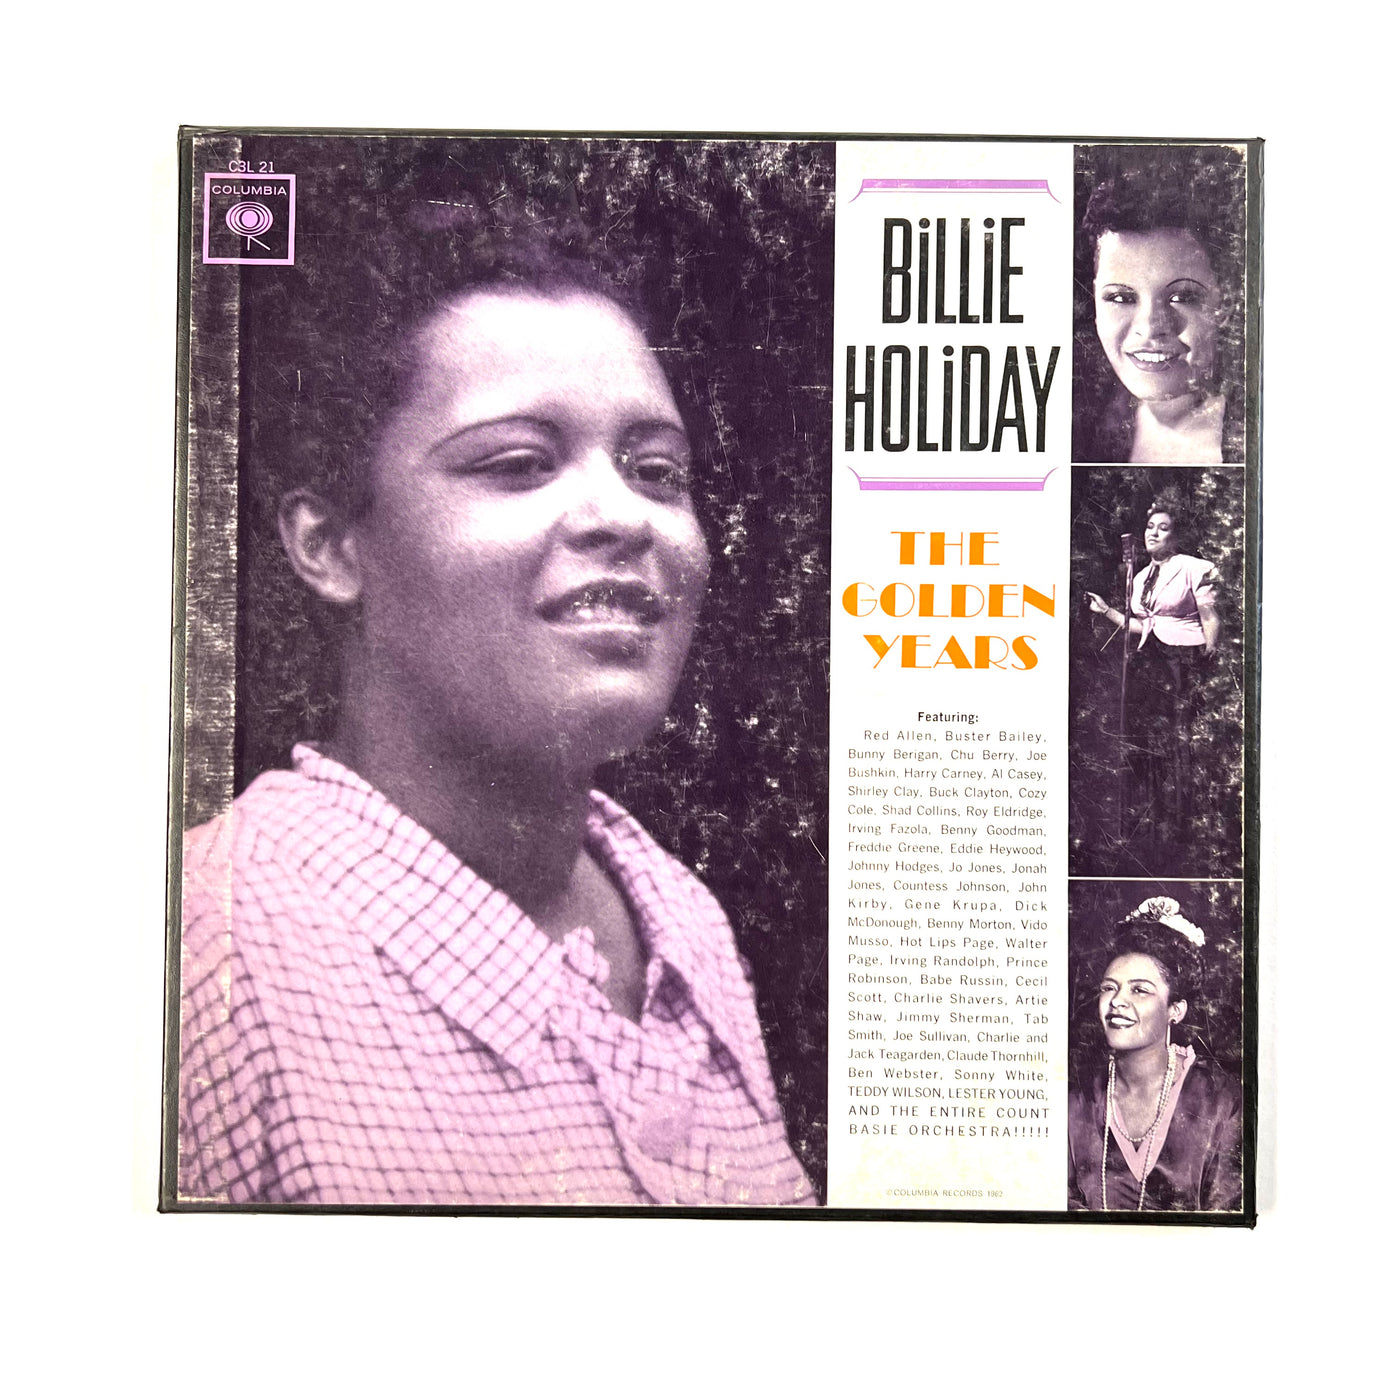 Billie Holiday - The Golden Years